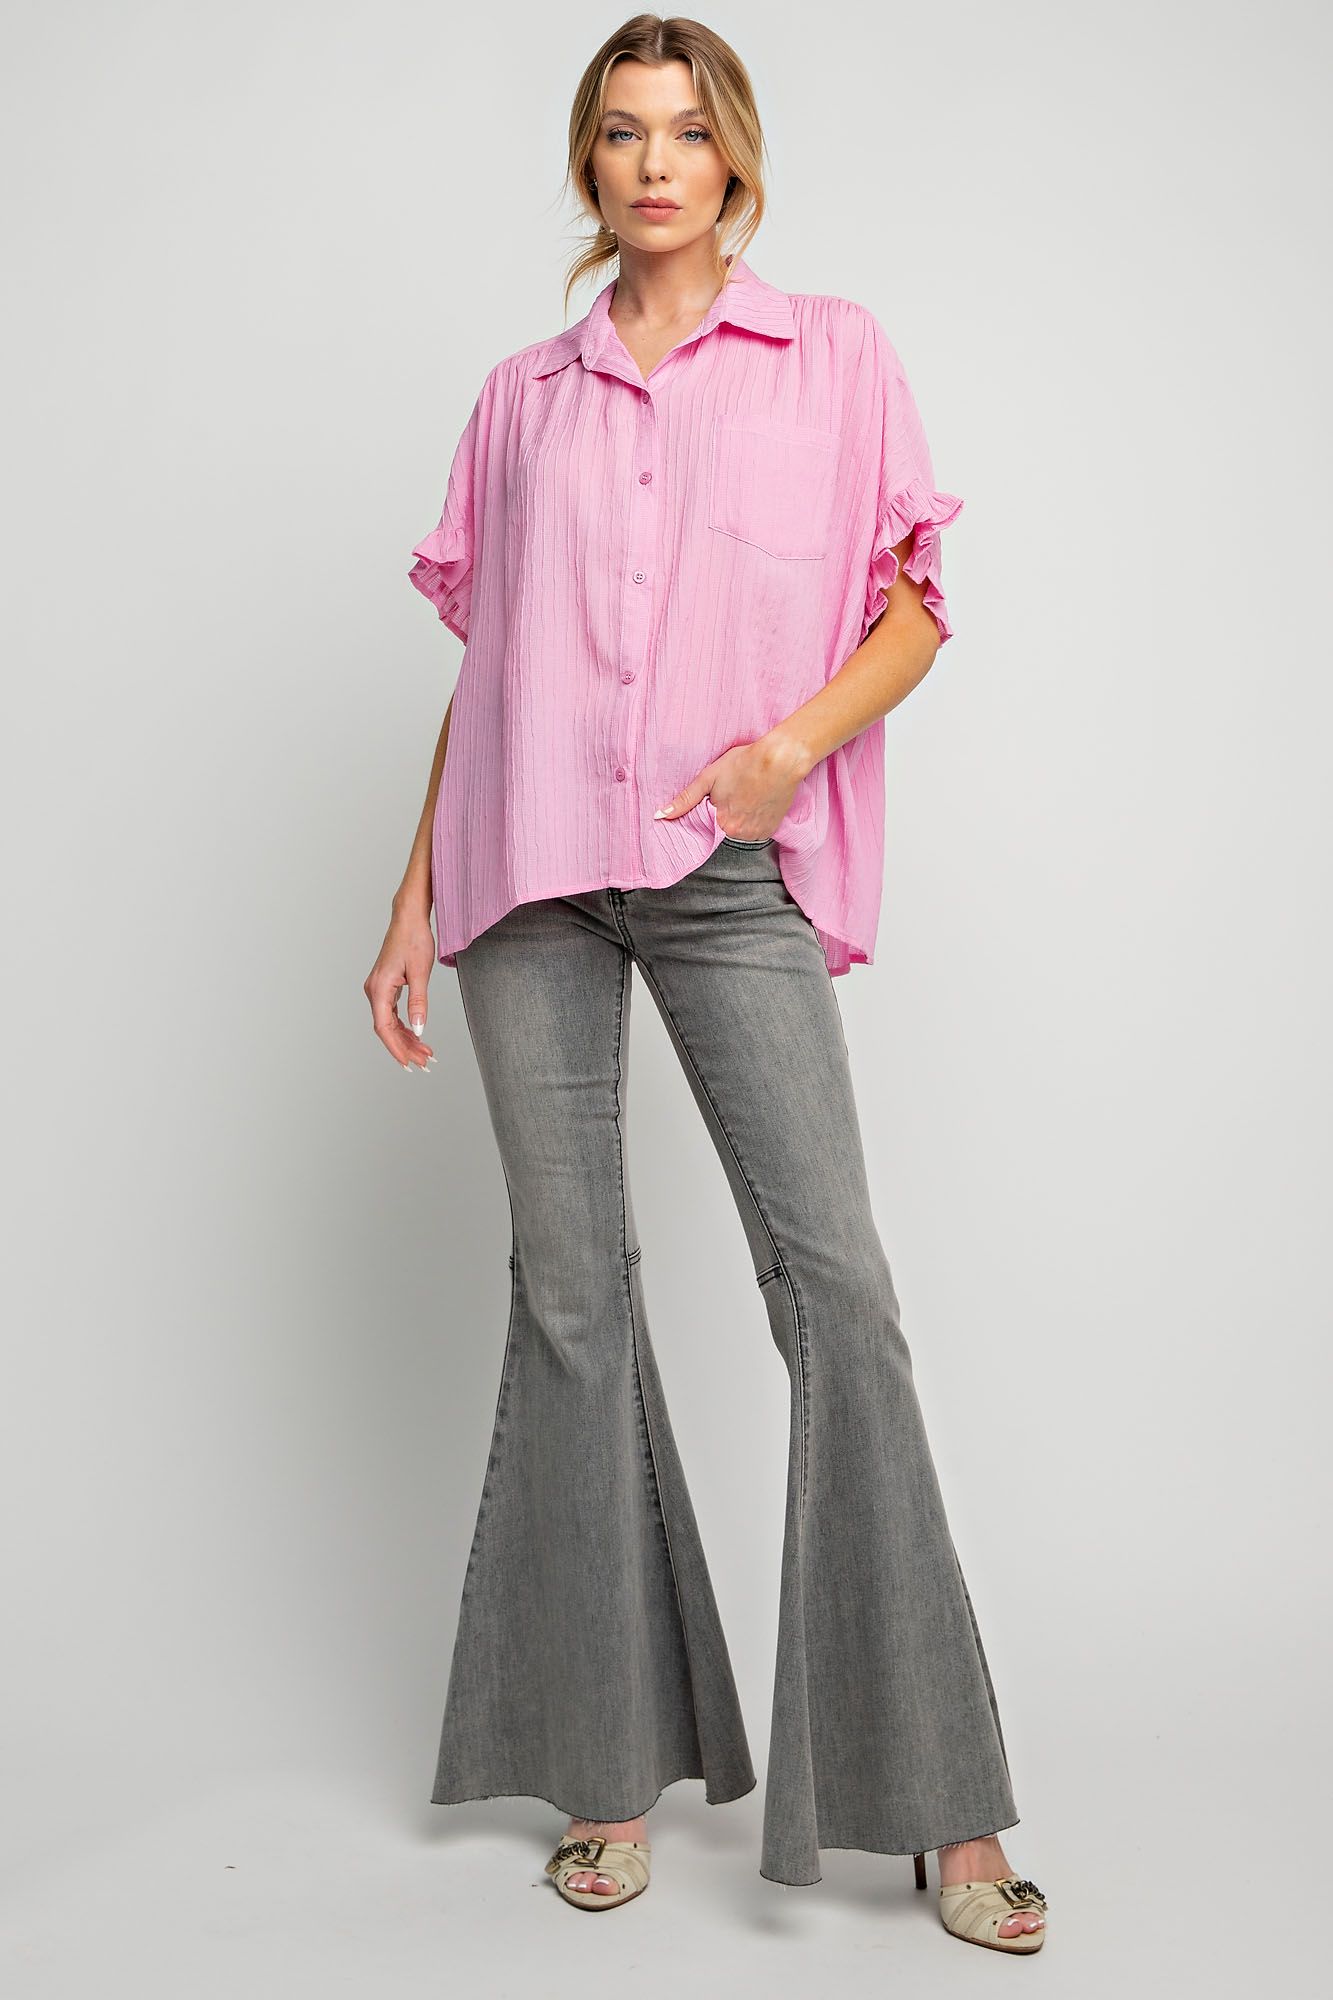 Easel Plus Bubble Gum Pink Textured Woven Ruffle Top